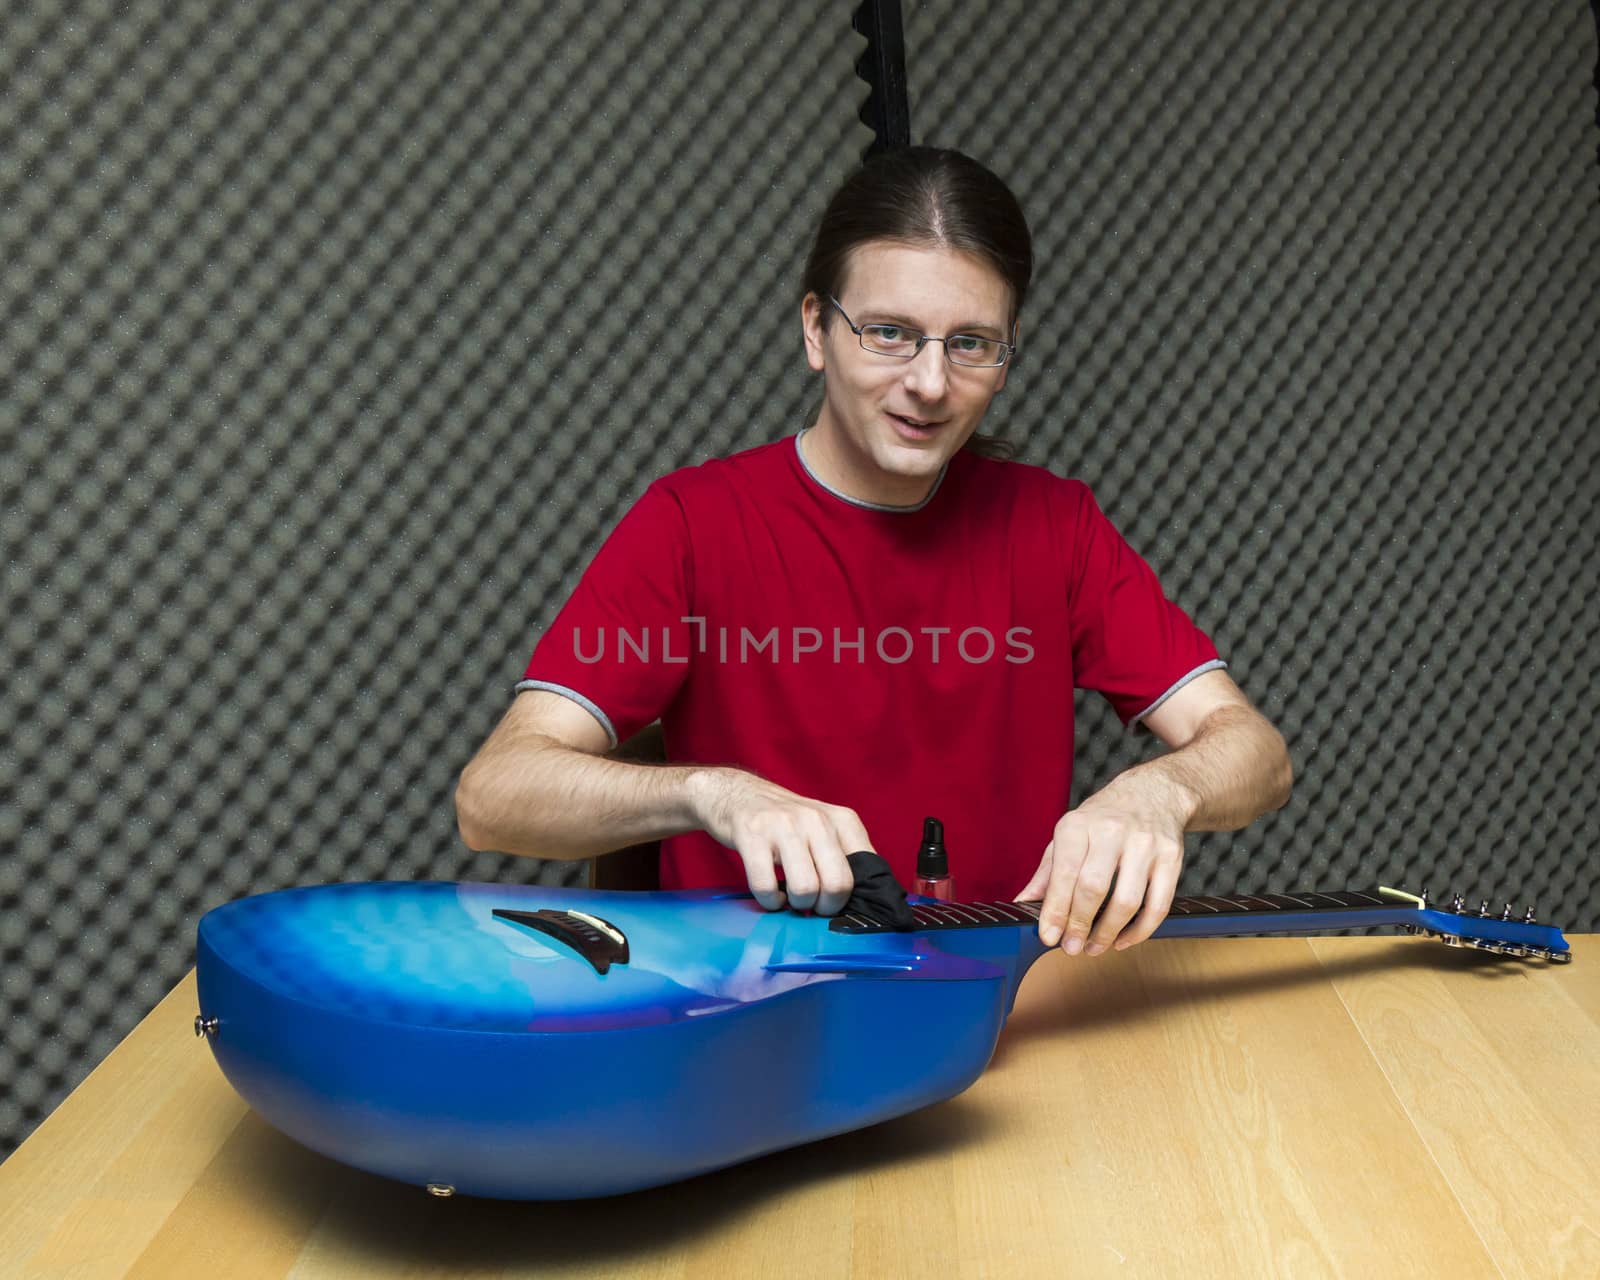 Guitar technician cleaning the guitar ( Series with the same model available)